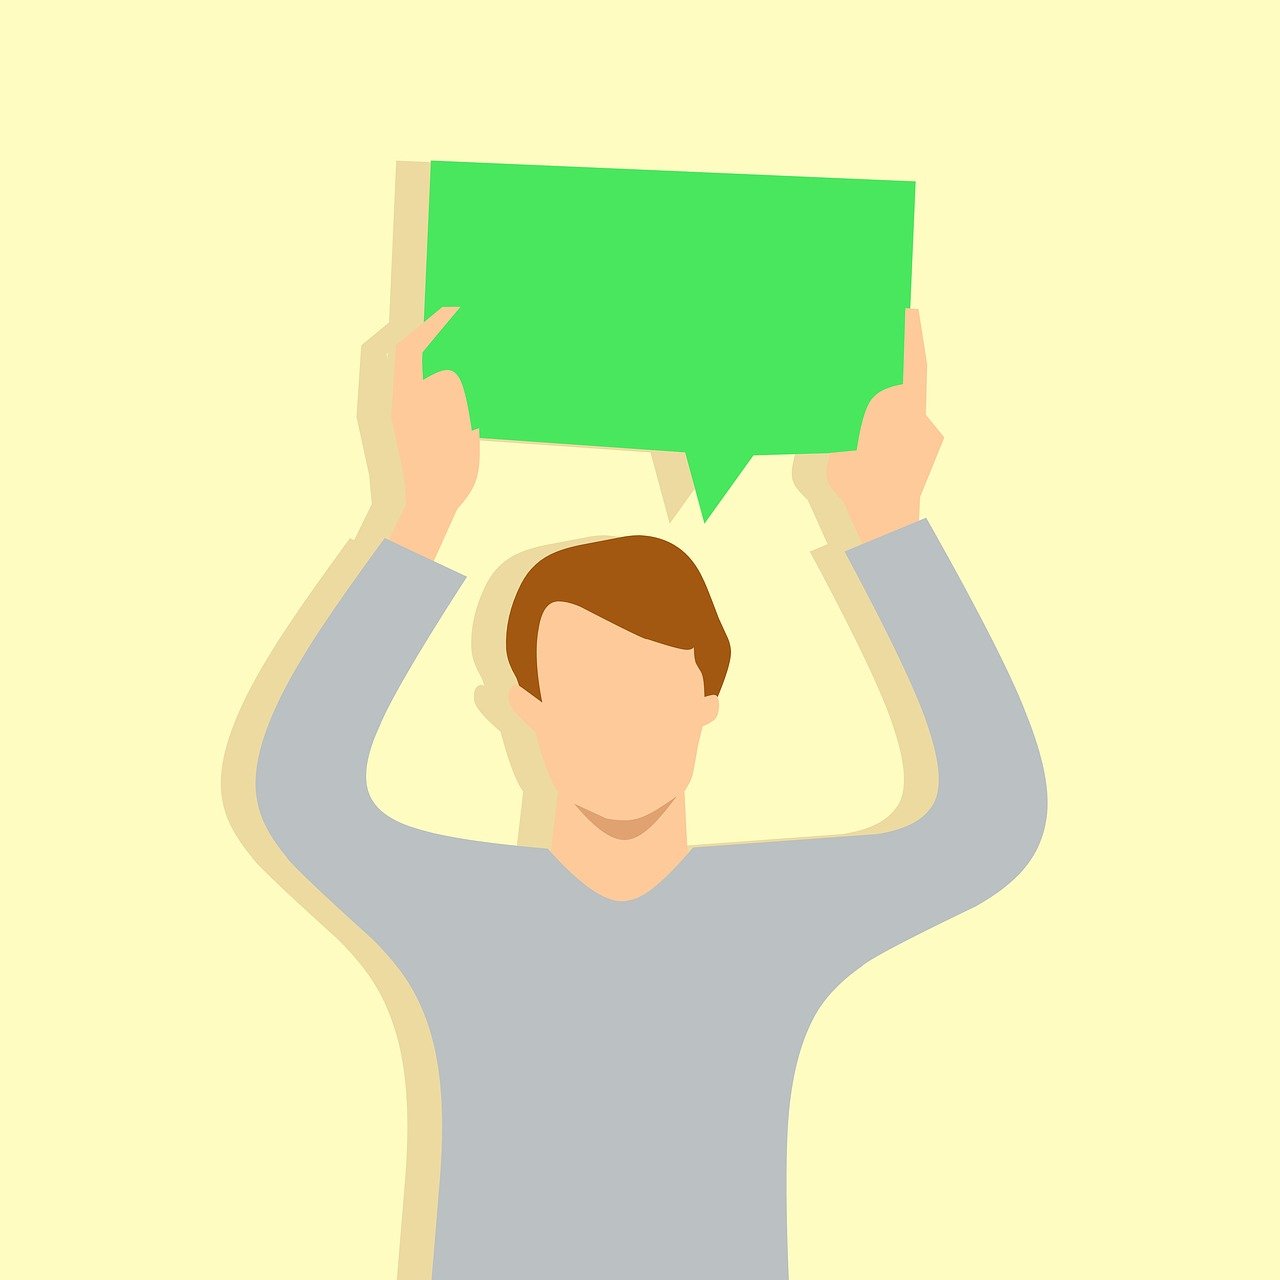 a man holding a green sign above his head, inspired by Emiliano Ponzi, shutterstock, telegram sticker design, flat cel shaded, talking, simple and clean illustration